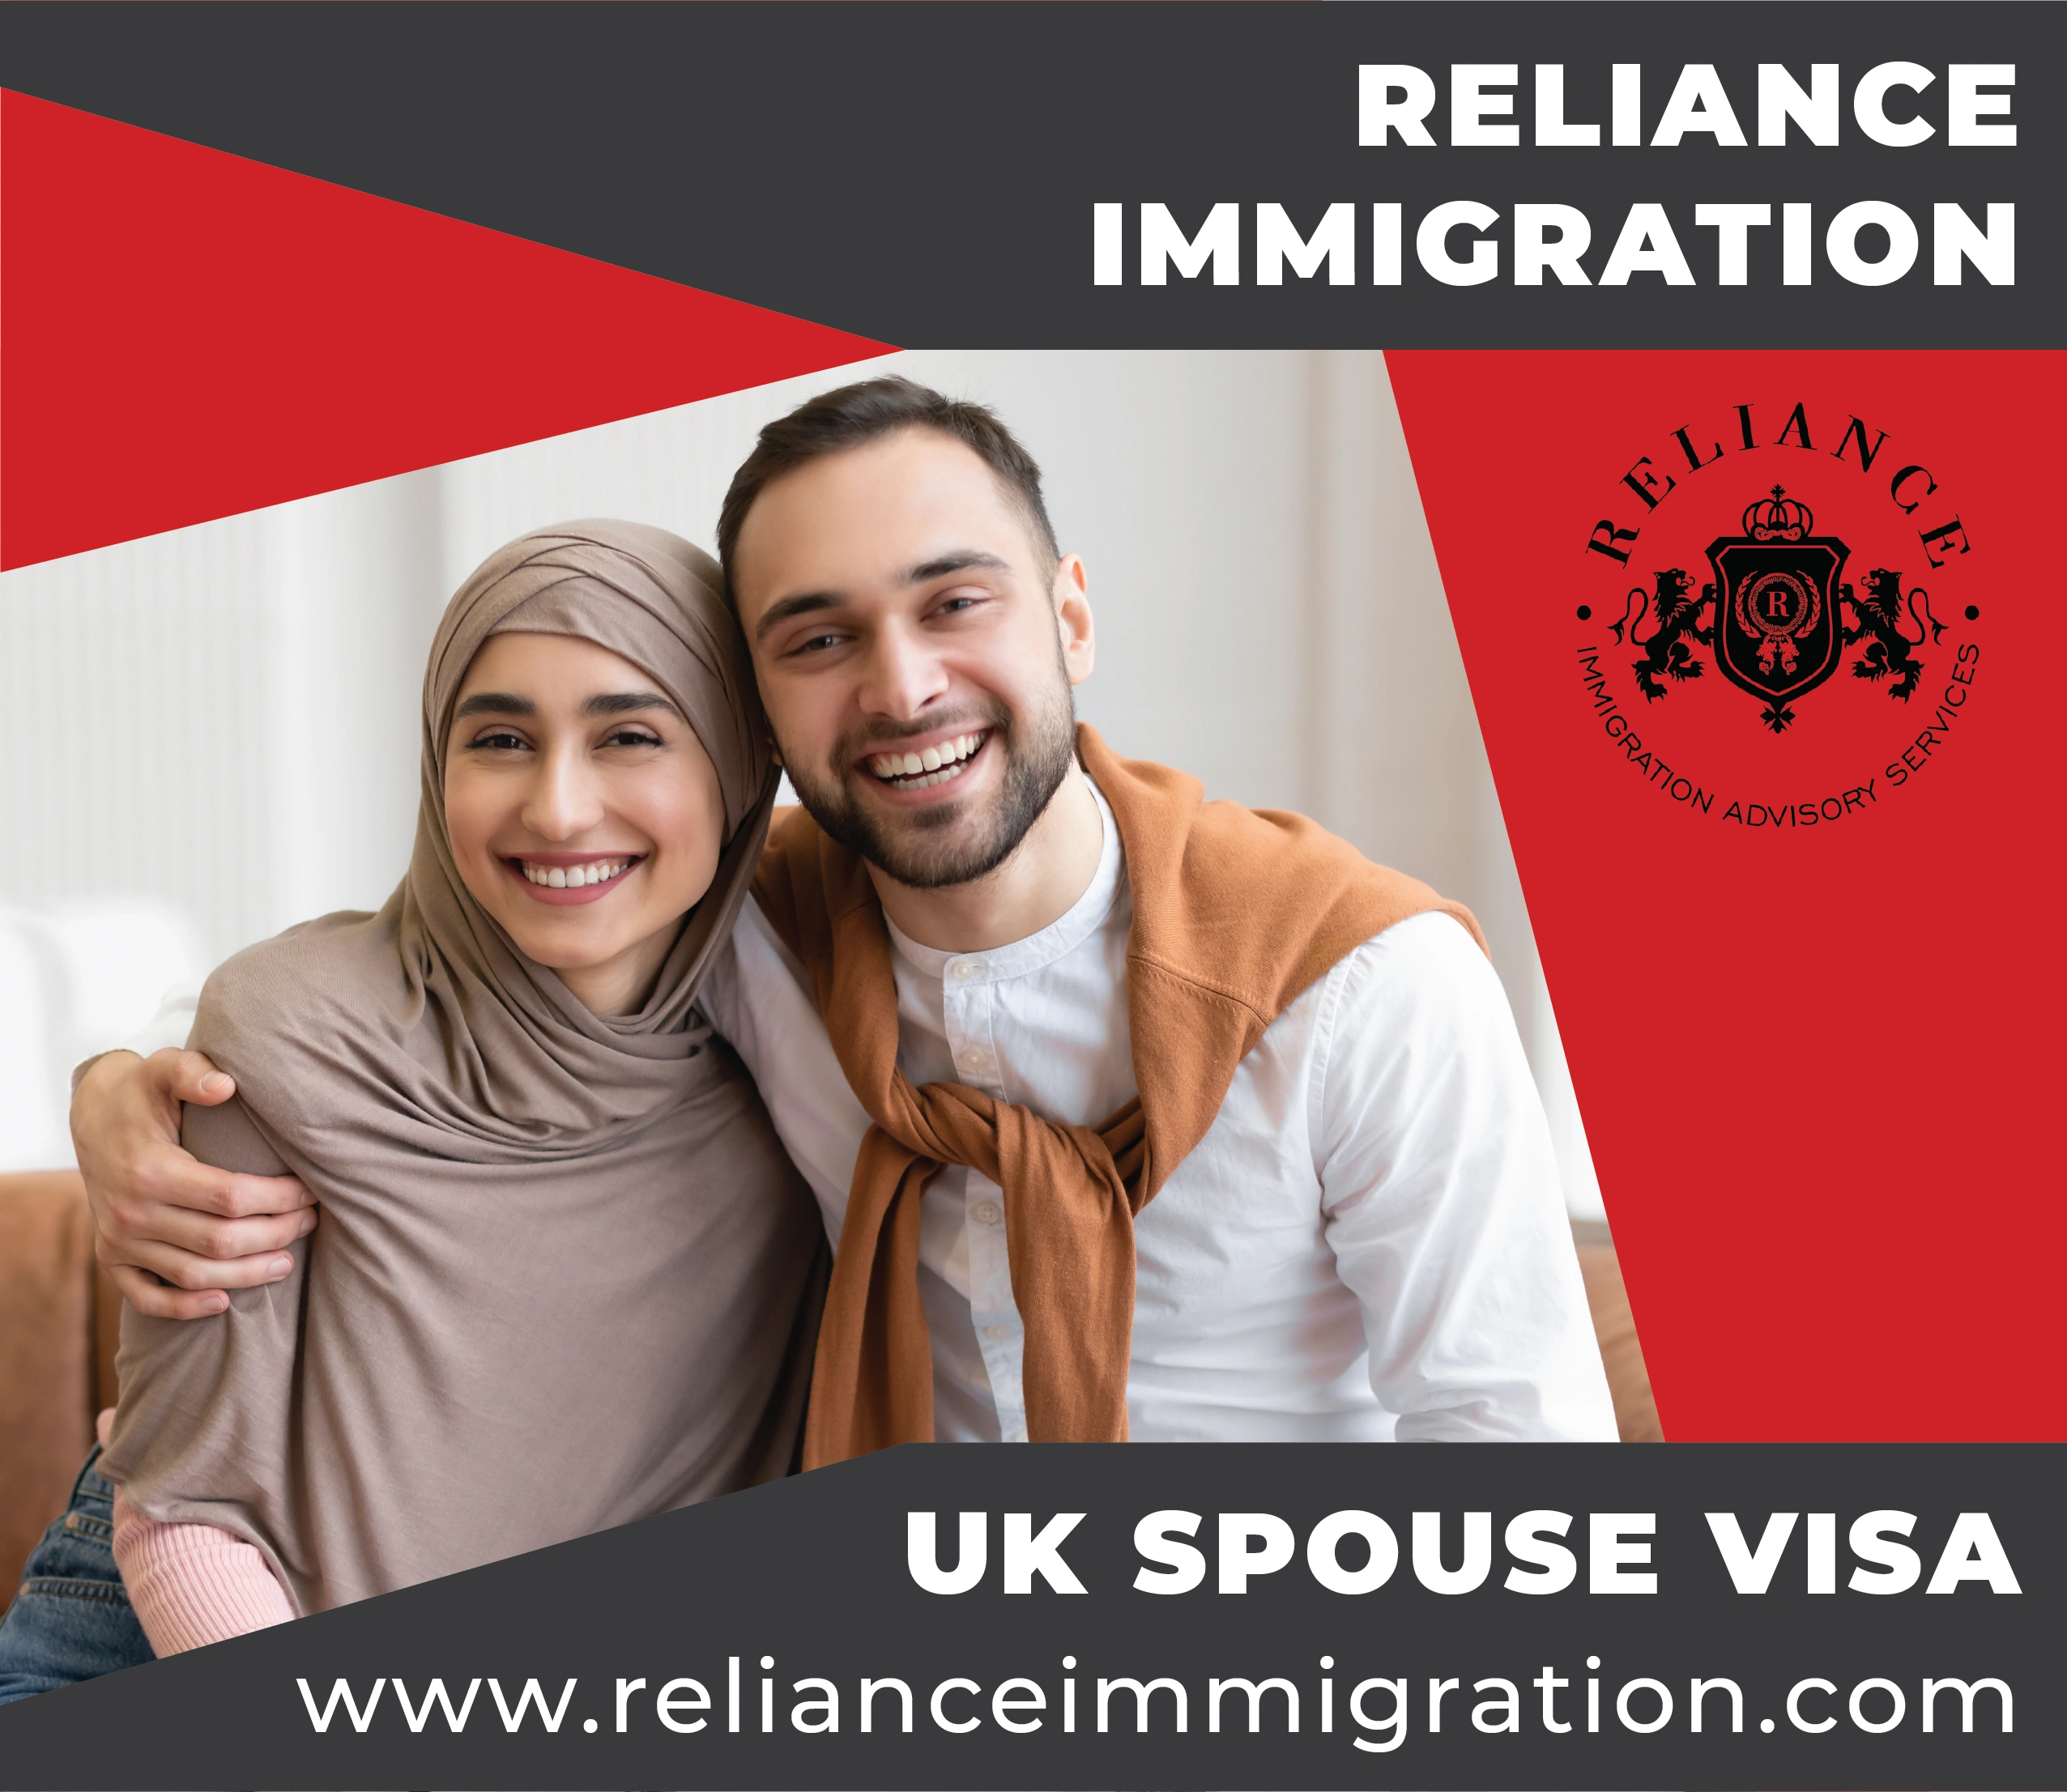 Reliance Immigration promotional banner with Logo containing information for UK Spouse Marriage Visa